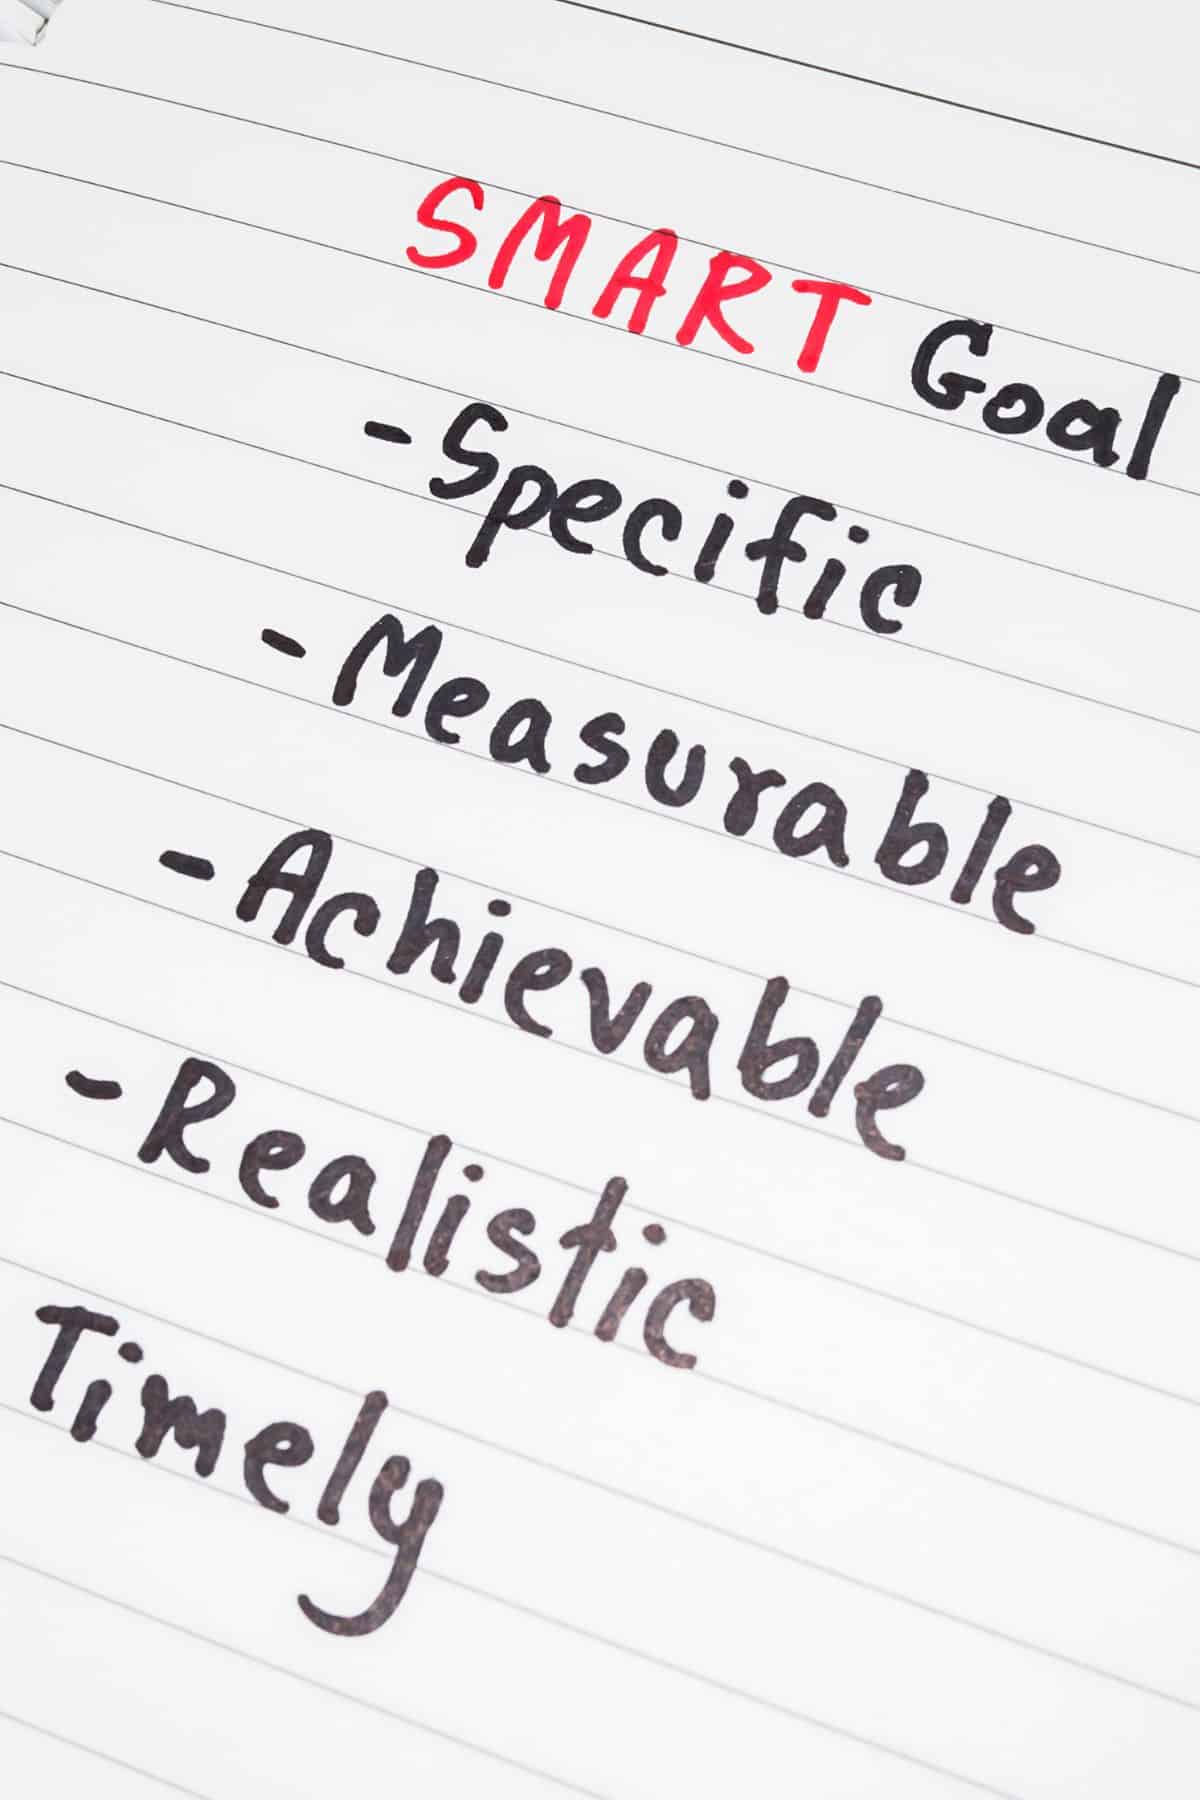 details of the elements of a SMART goal on a piece of notebook paper.